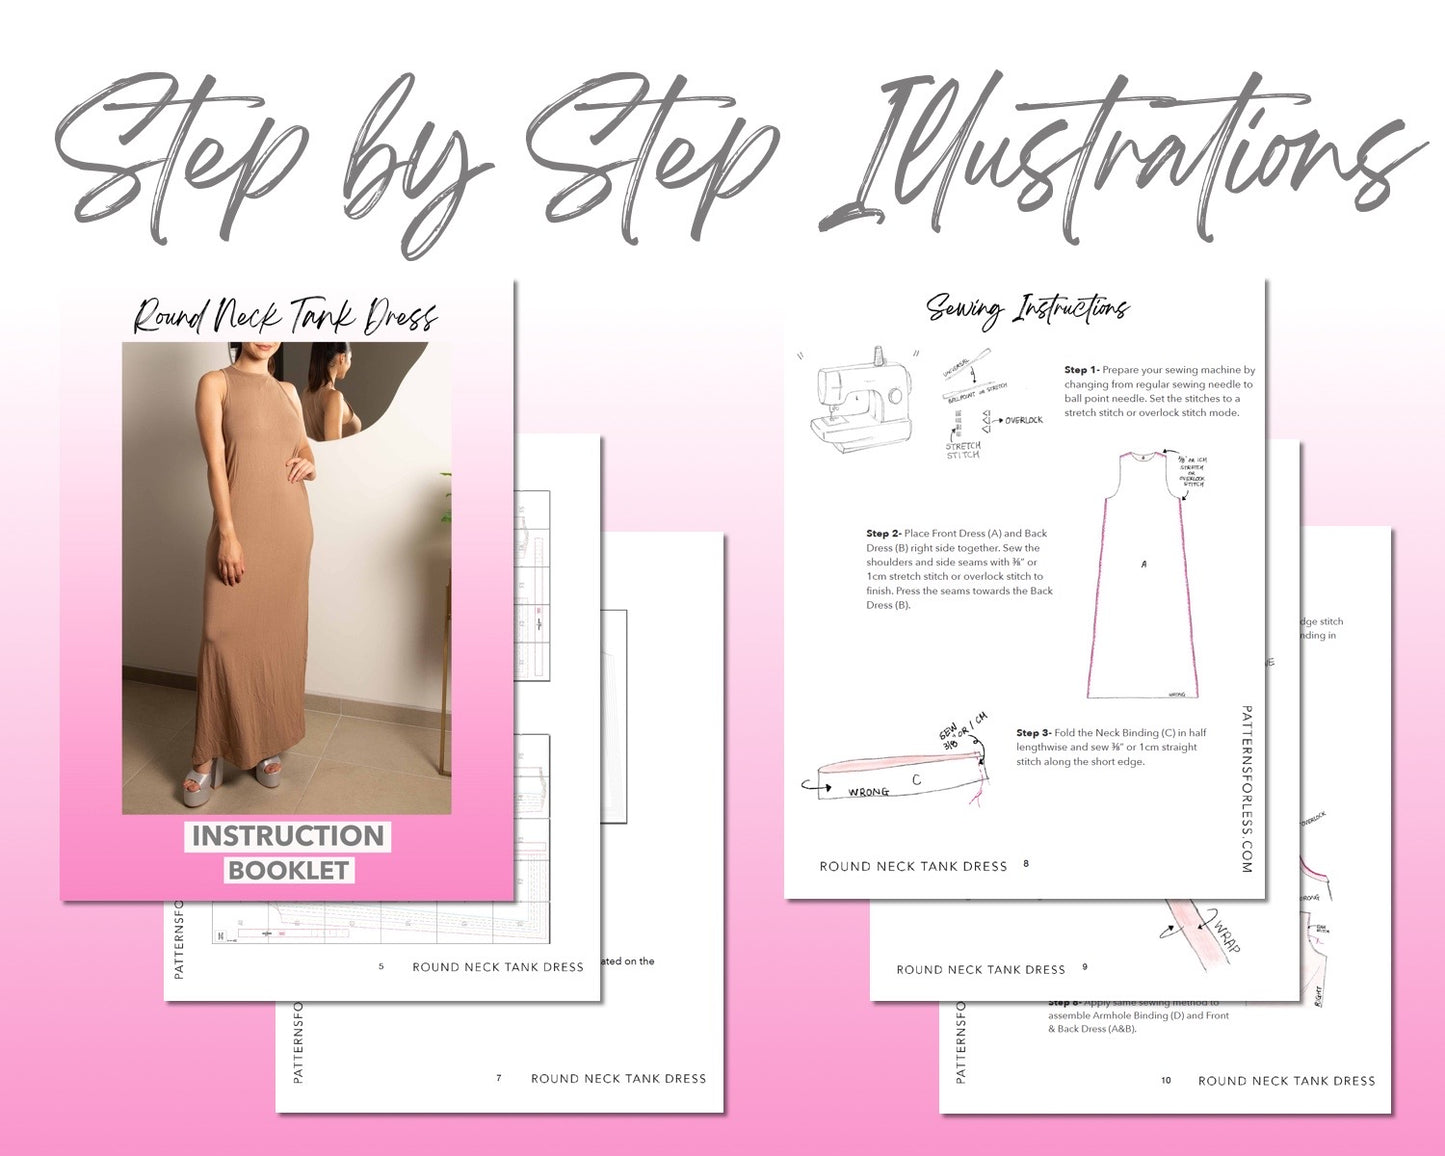 Round Neck Tank Dress sewing pattern step by step illustrations.